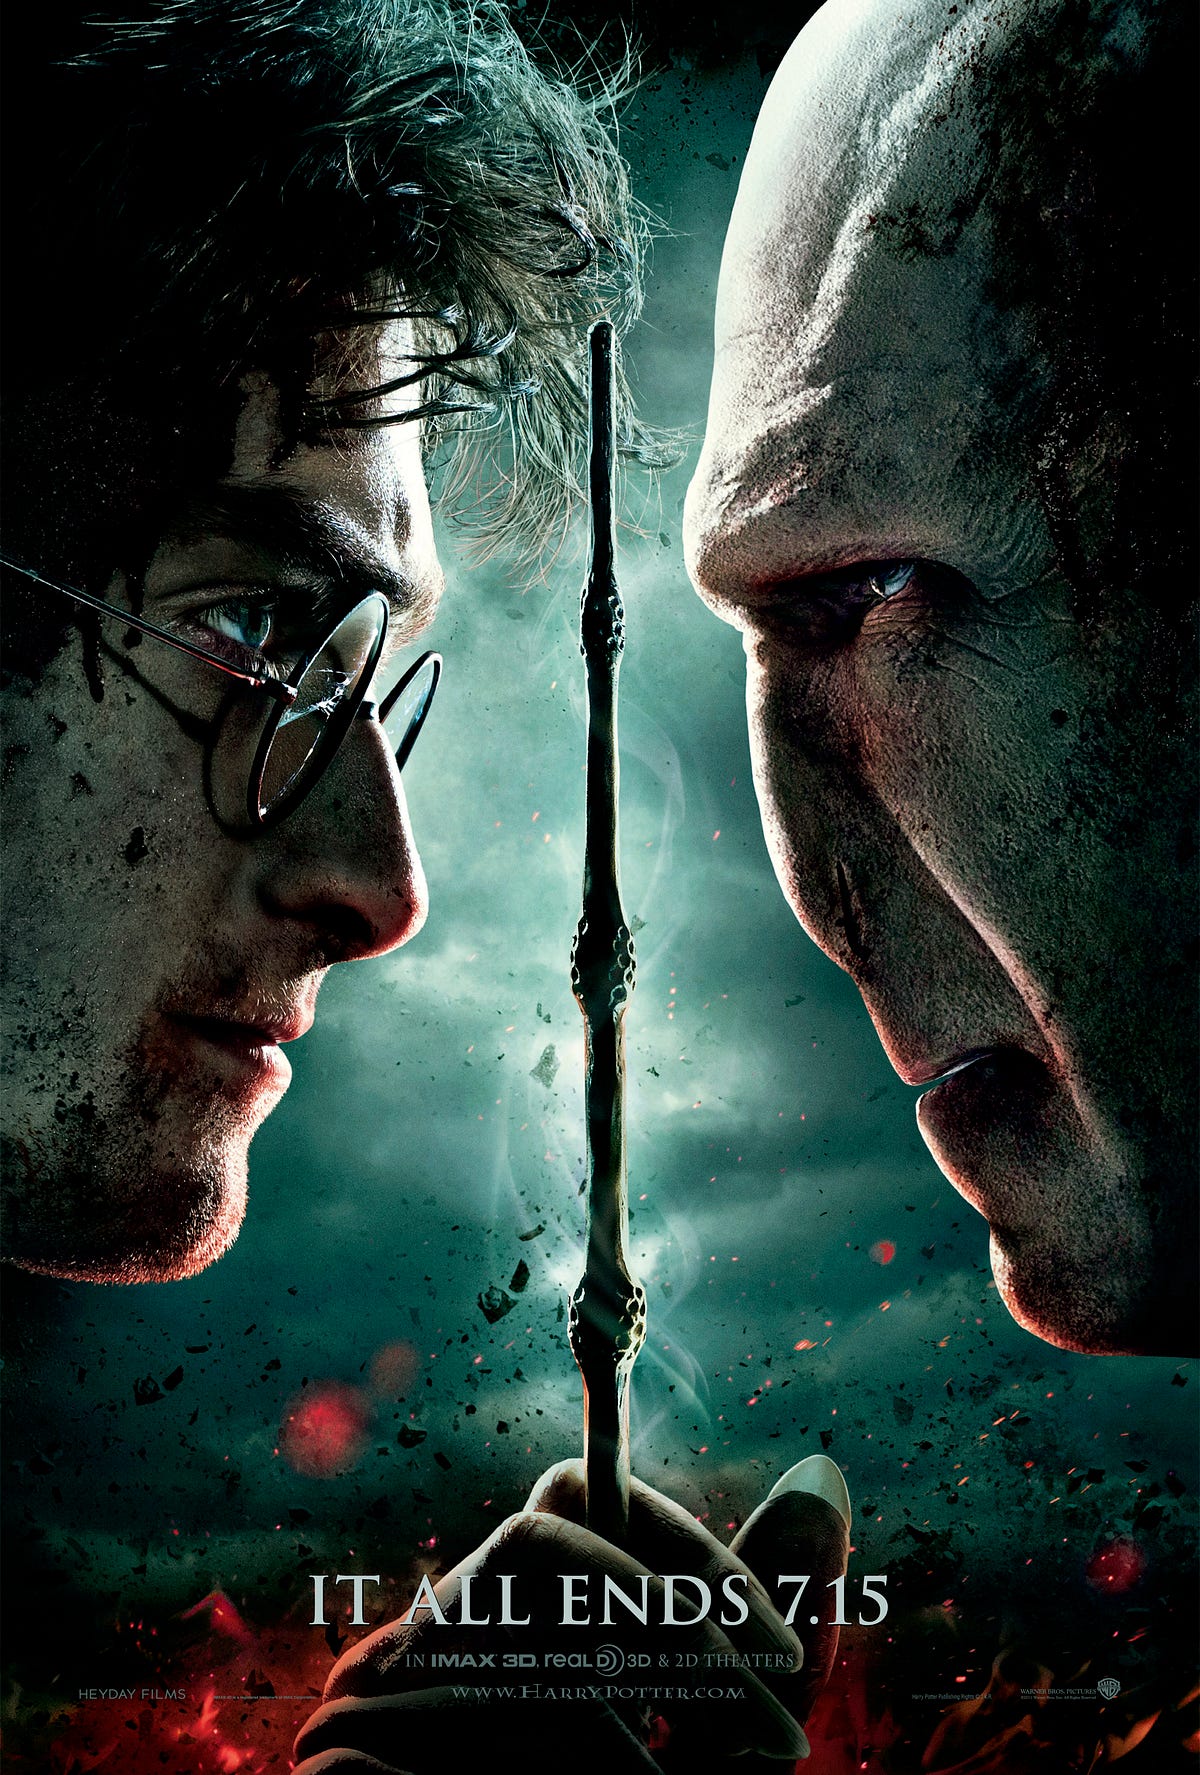 Harry Potter and the Deathly Hallows Part 2 Analysis/Review | by Sarah  Sunday | Media Authority | Medium